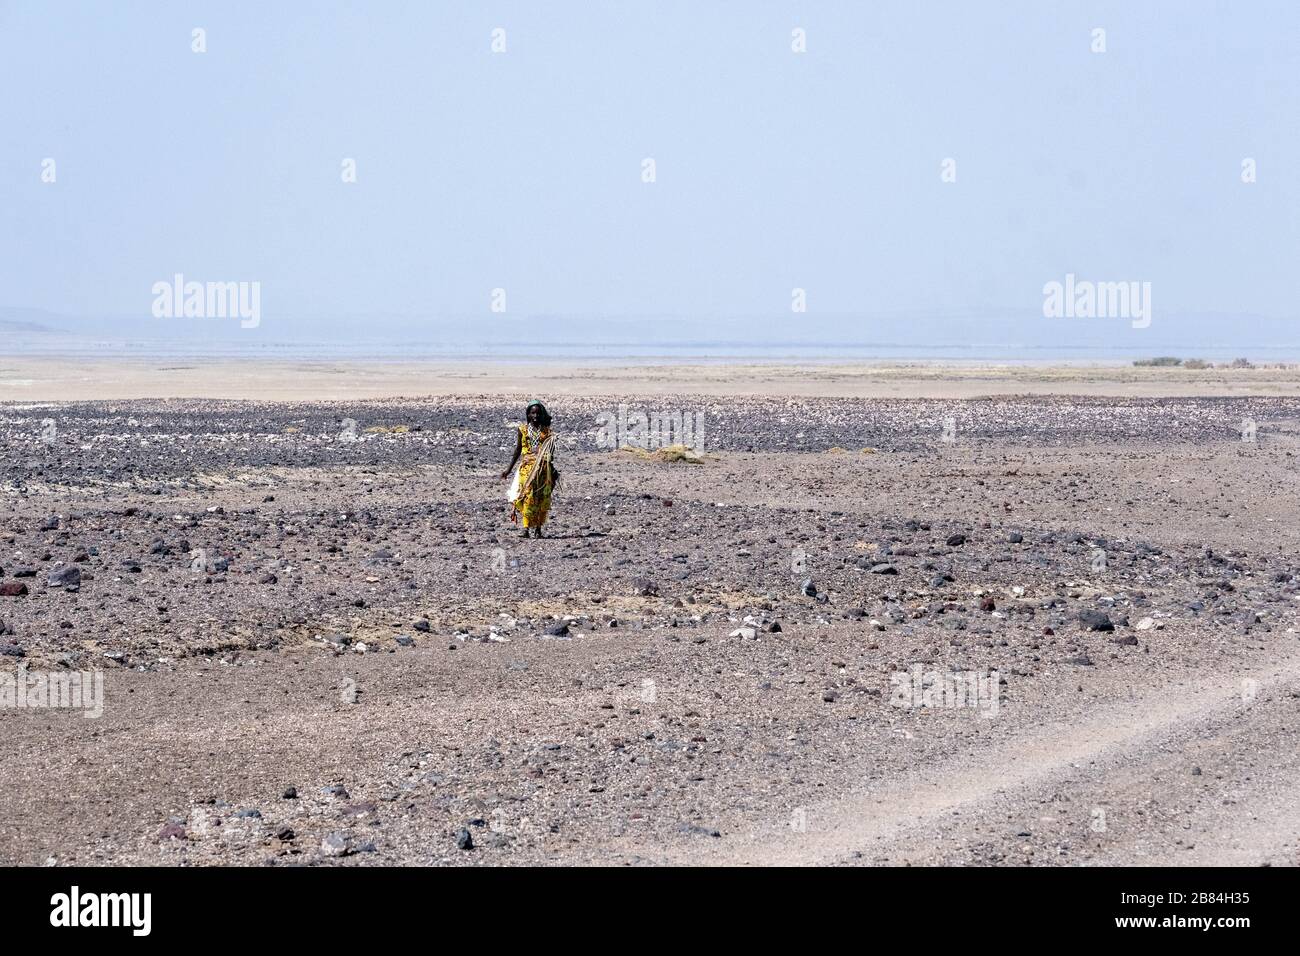 Africa, Djibouti, Lake Abbe. A A woman walks in the desert on the way to Lake Abbe Stock Photo